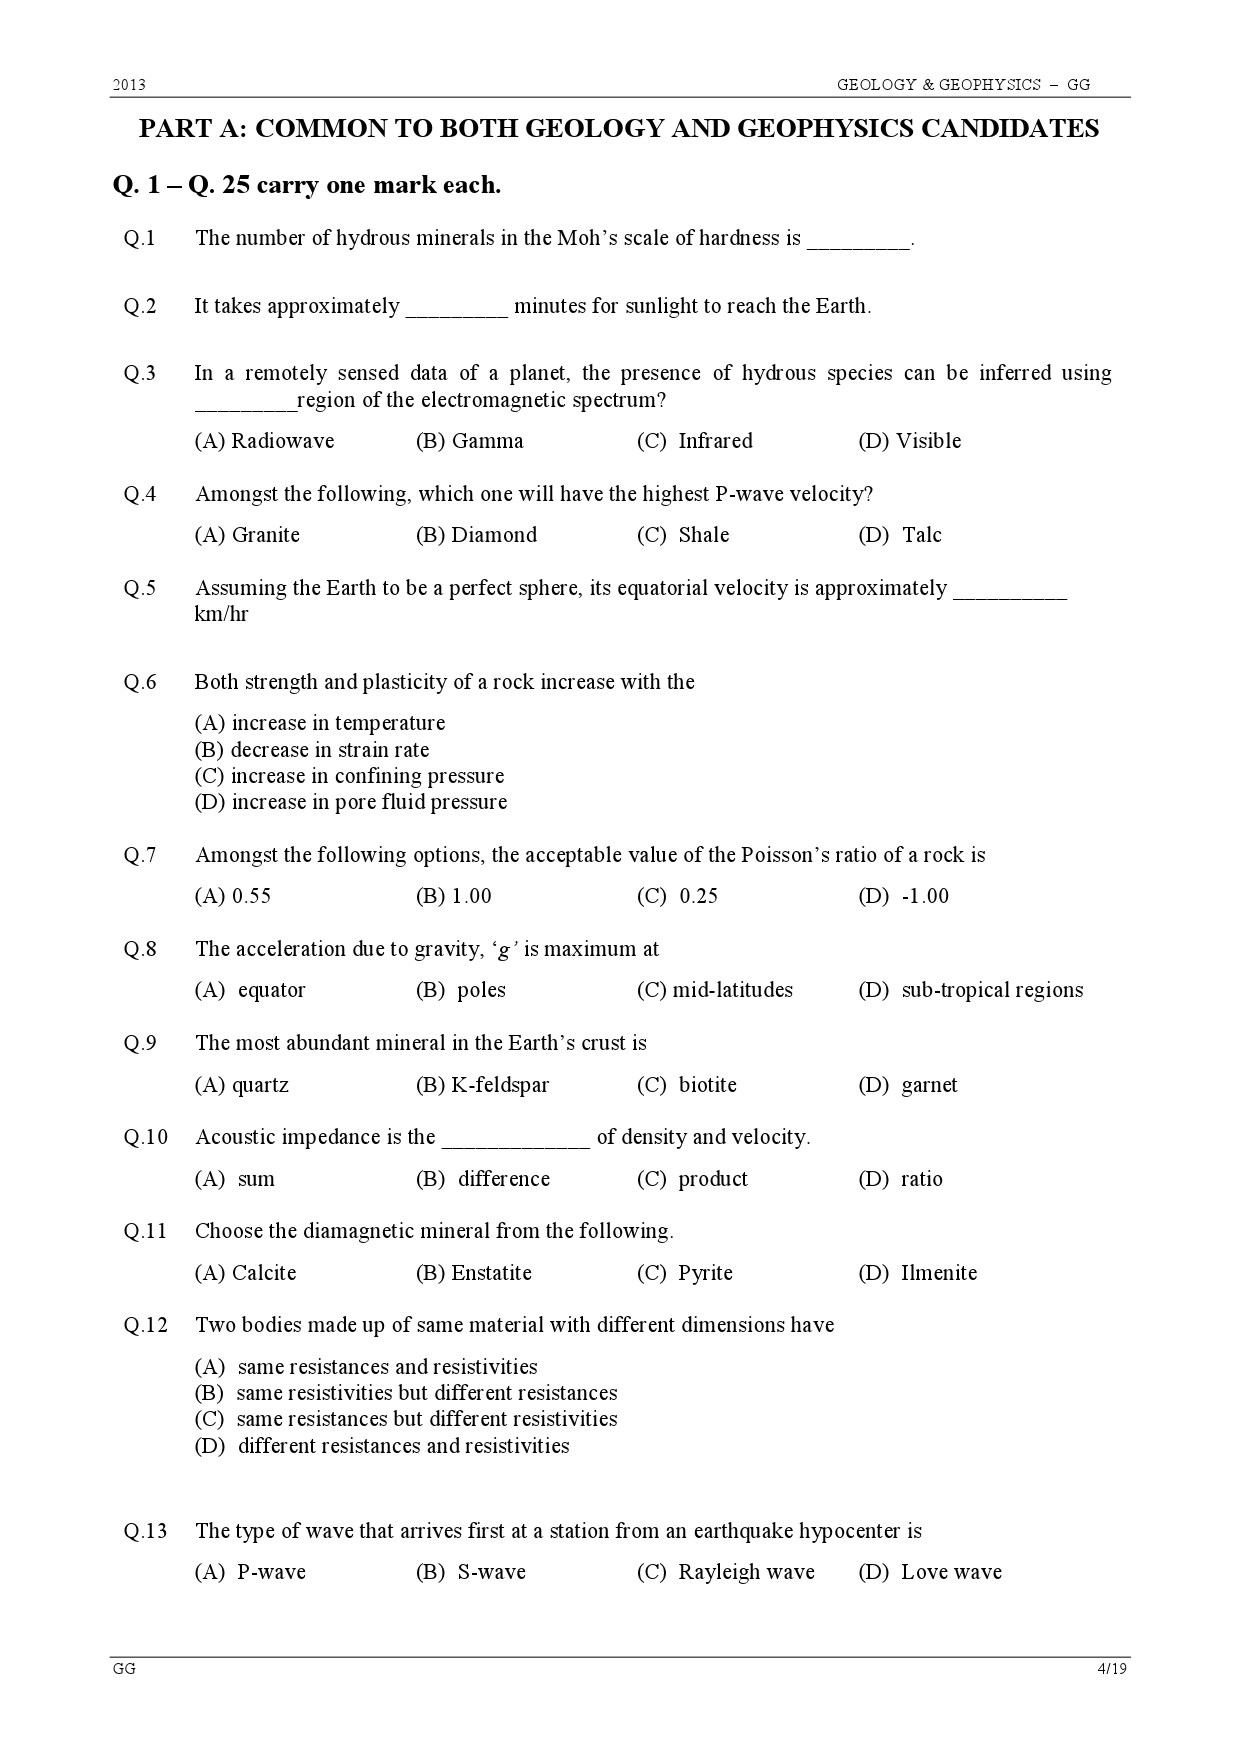 GATE Exam Question Paper 2013 Geology and Geophysics 4